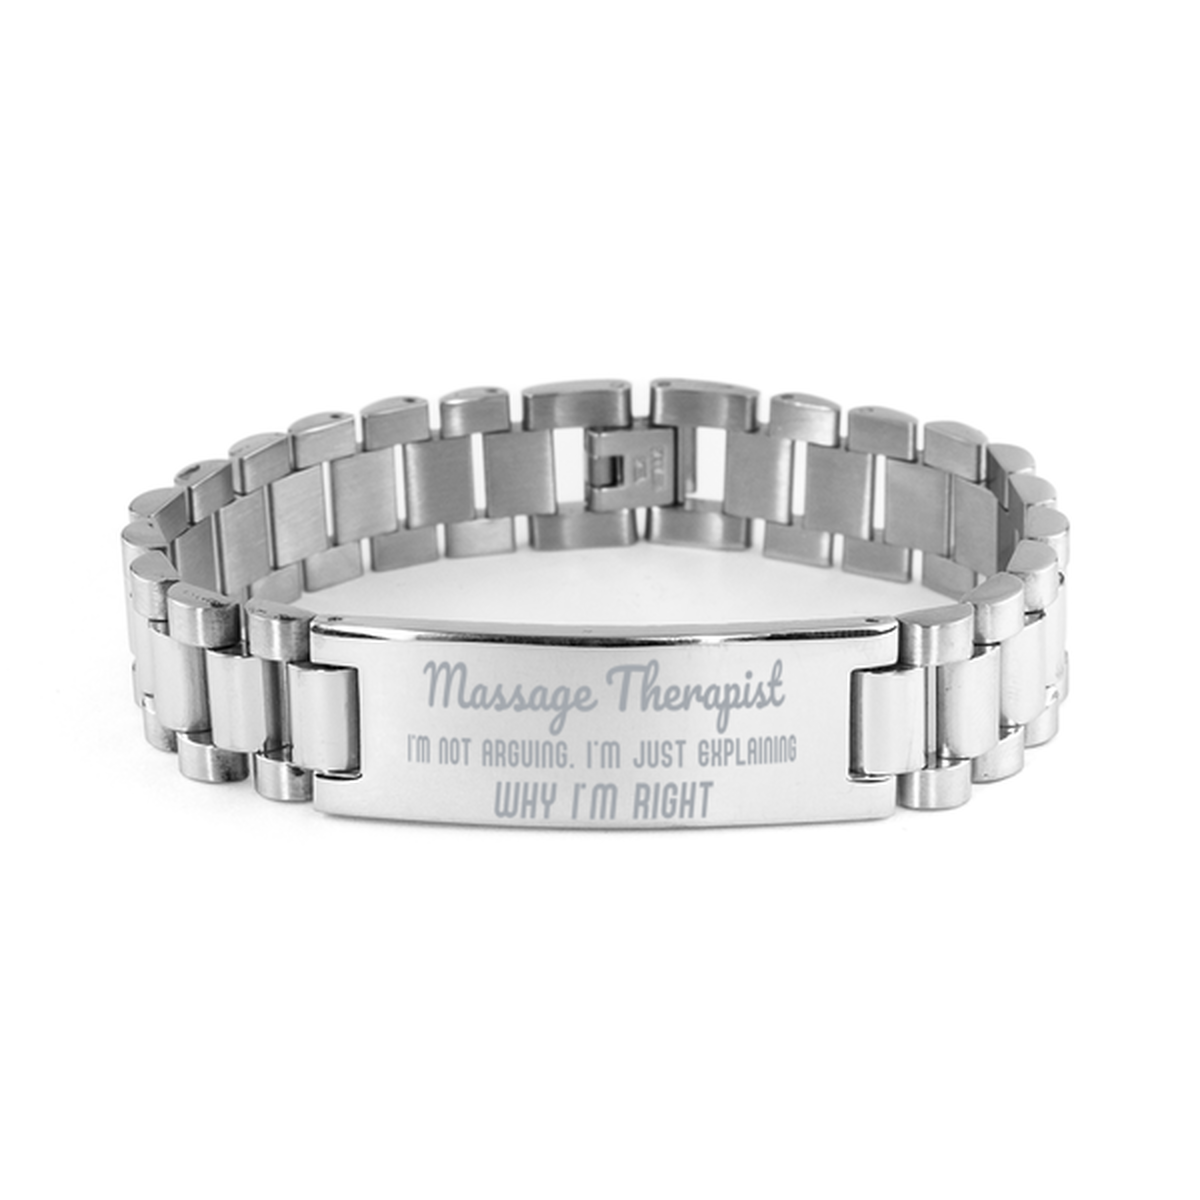 Massage Therapist I'm not Arguing. I'm Just Explaining Why I'm RIGHT Ladder Stainless Steel Bracelet, Graduation Birthday Christmas Massage Therapist Gifts For Massage Therapist Funny Saying Quote Present for Men Women Coworker